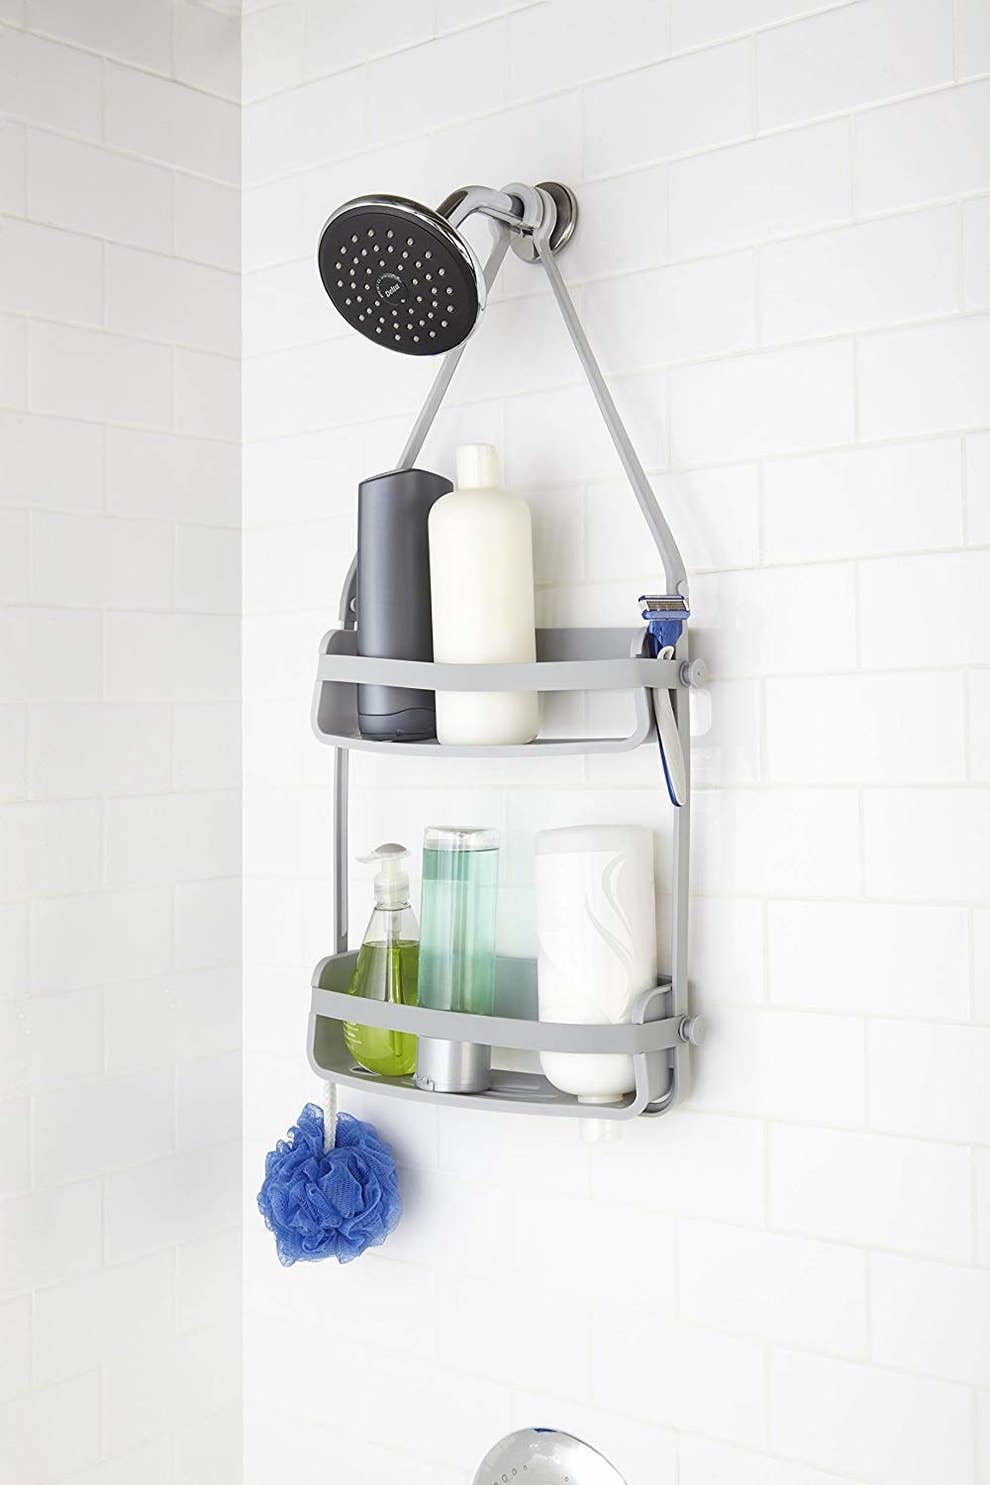 30 Of The Best Bathroom Accessories You, Bathtub Shower Accessories